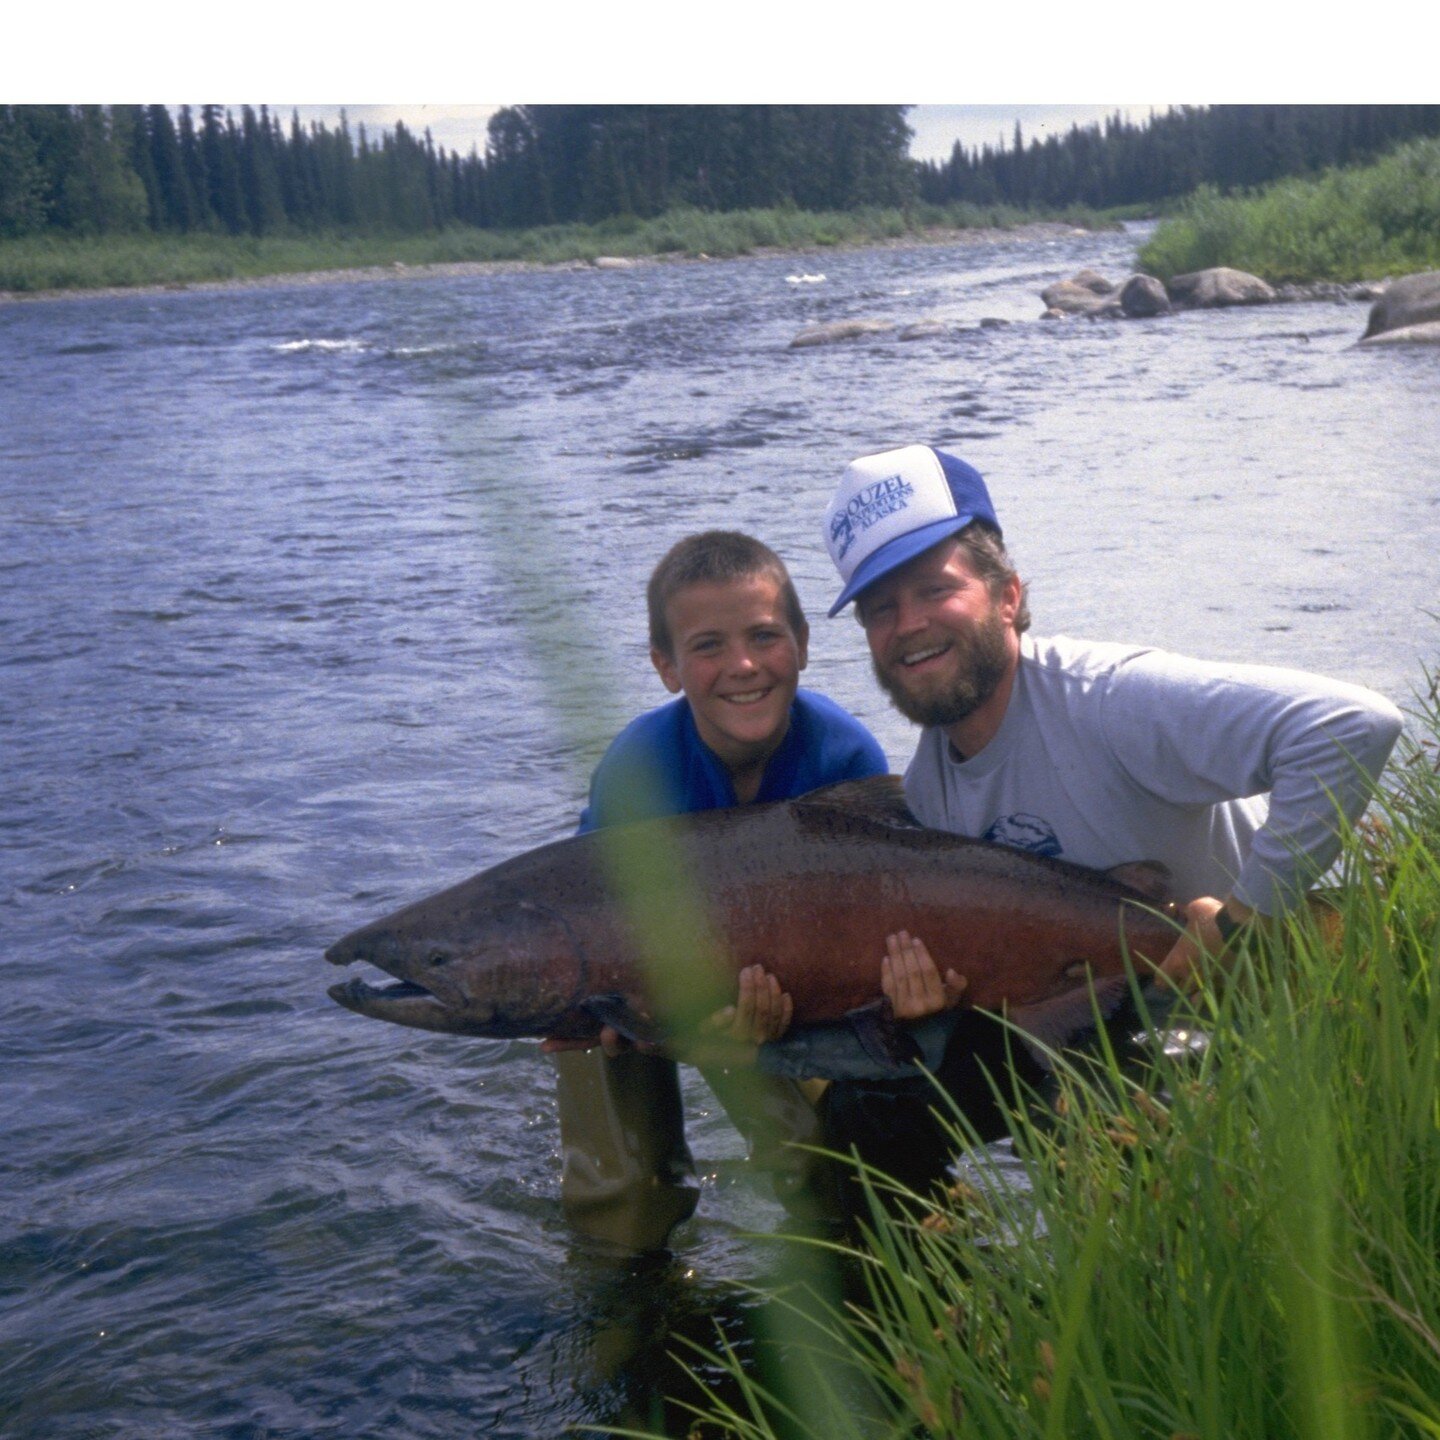 Richie Shine, here on the left, caught this mighty King on Lake Creek with an Ouzel trip, back in the day. He's back guiding with us this summer, and we are excited to be out on the river with him! Look forward to enjoying his upbeat energy, awesome 